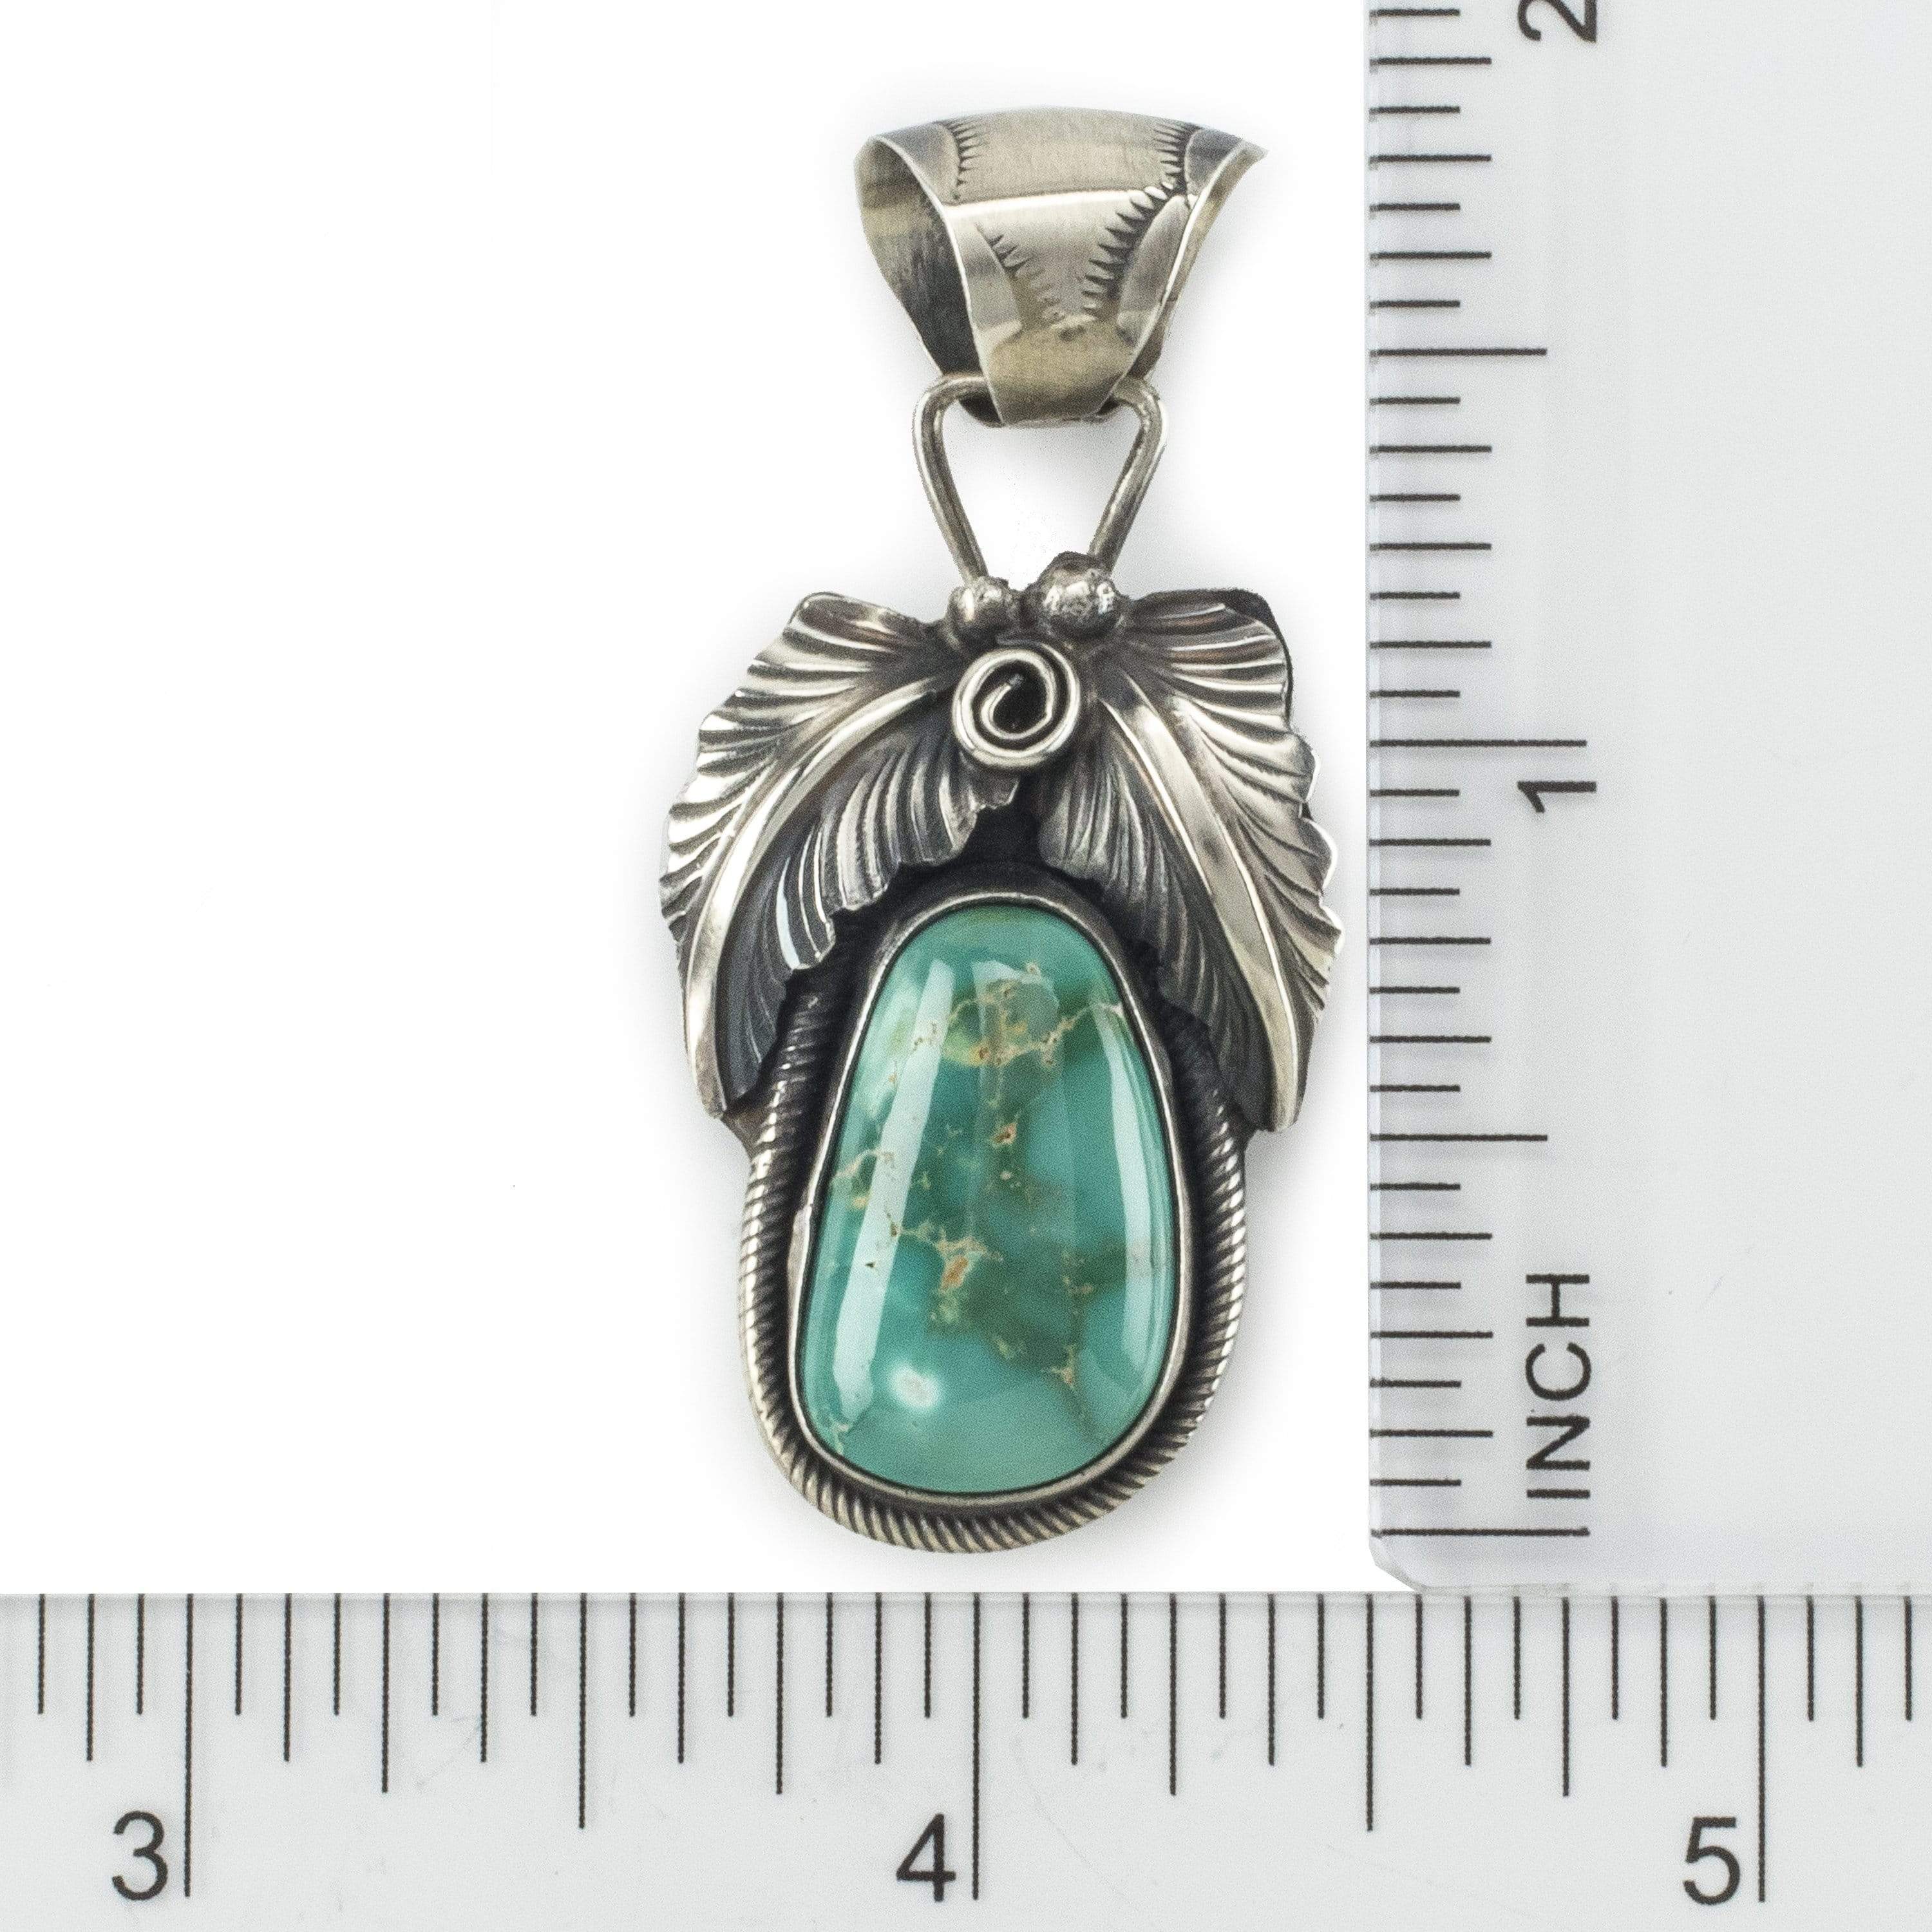 Kalifano Native American Jewelry Royston Turquoise USA Native American Made 925 Sterling Silver Pendant NAN600.007